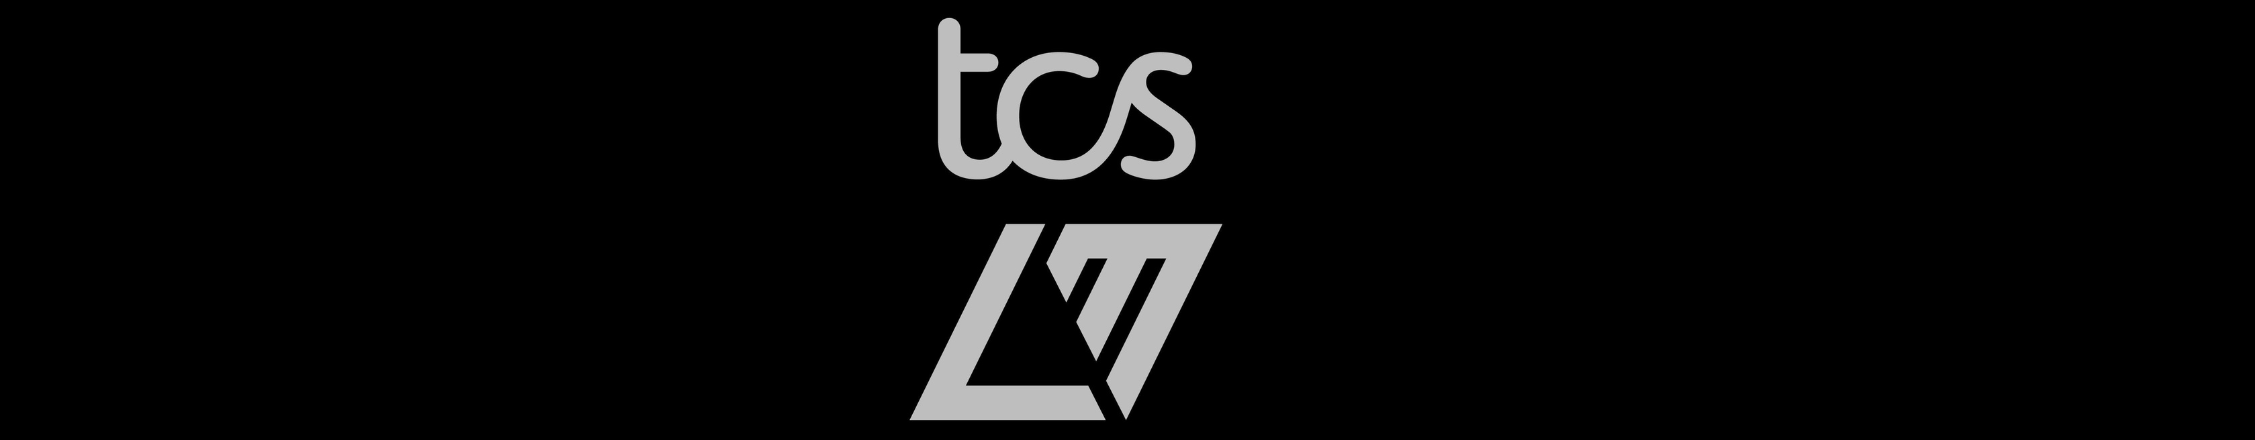 TCS LM banner